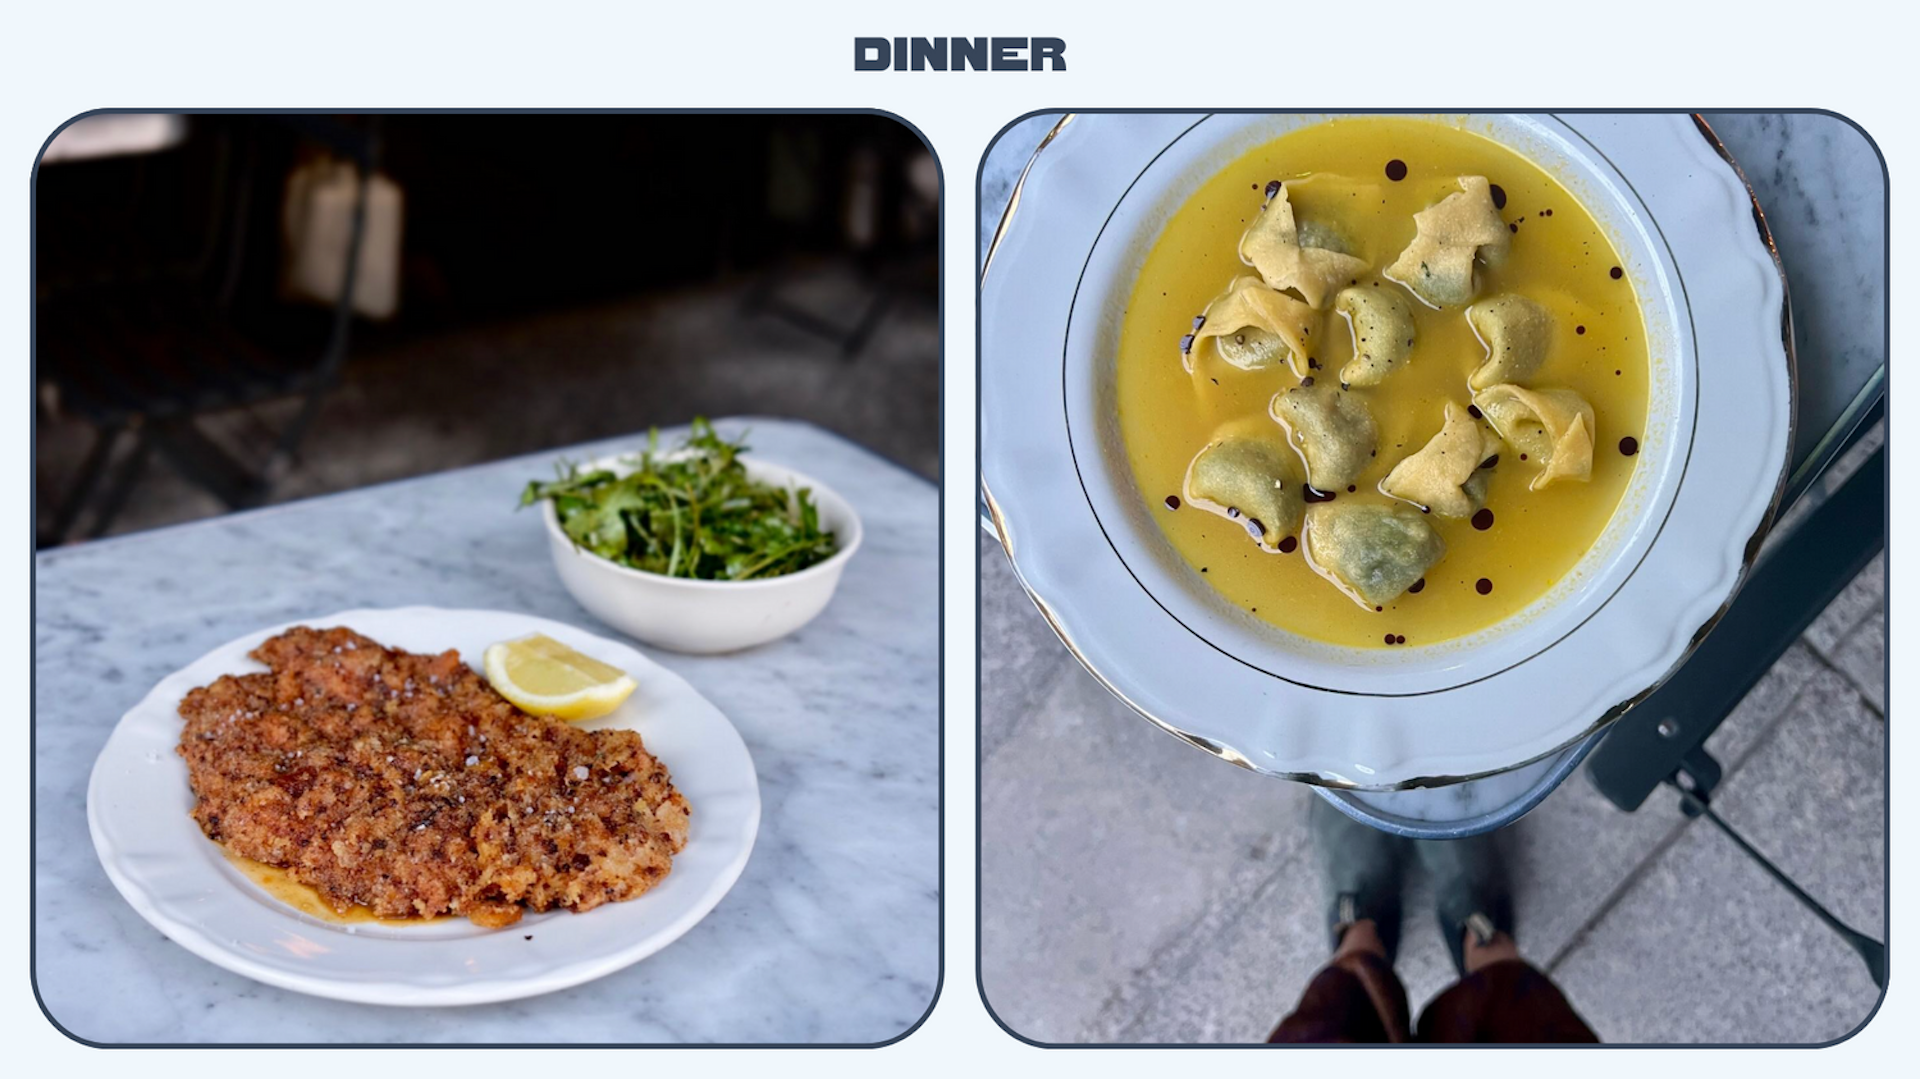 Left: A plate of veal milanesa. Right: A bowl of tortellini soup. 